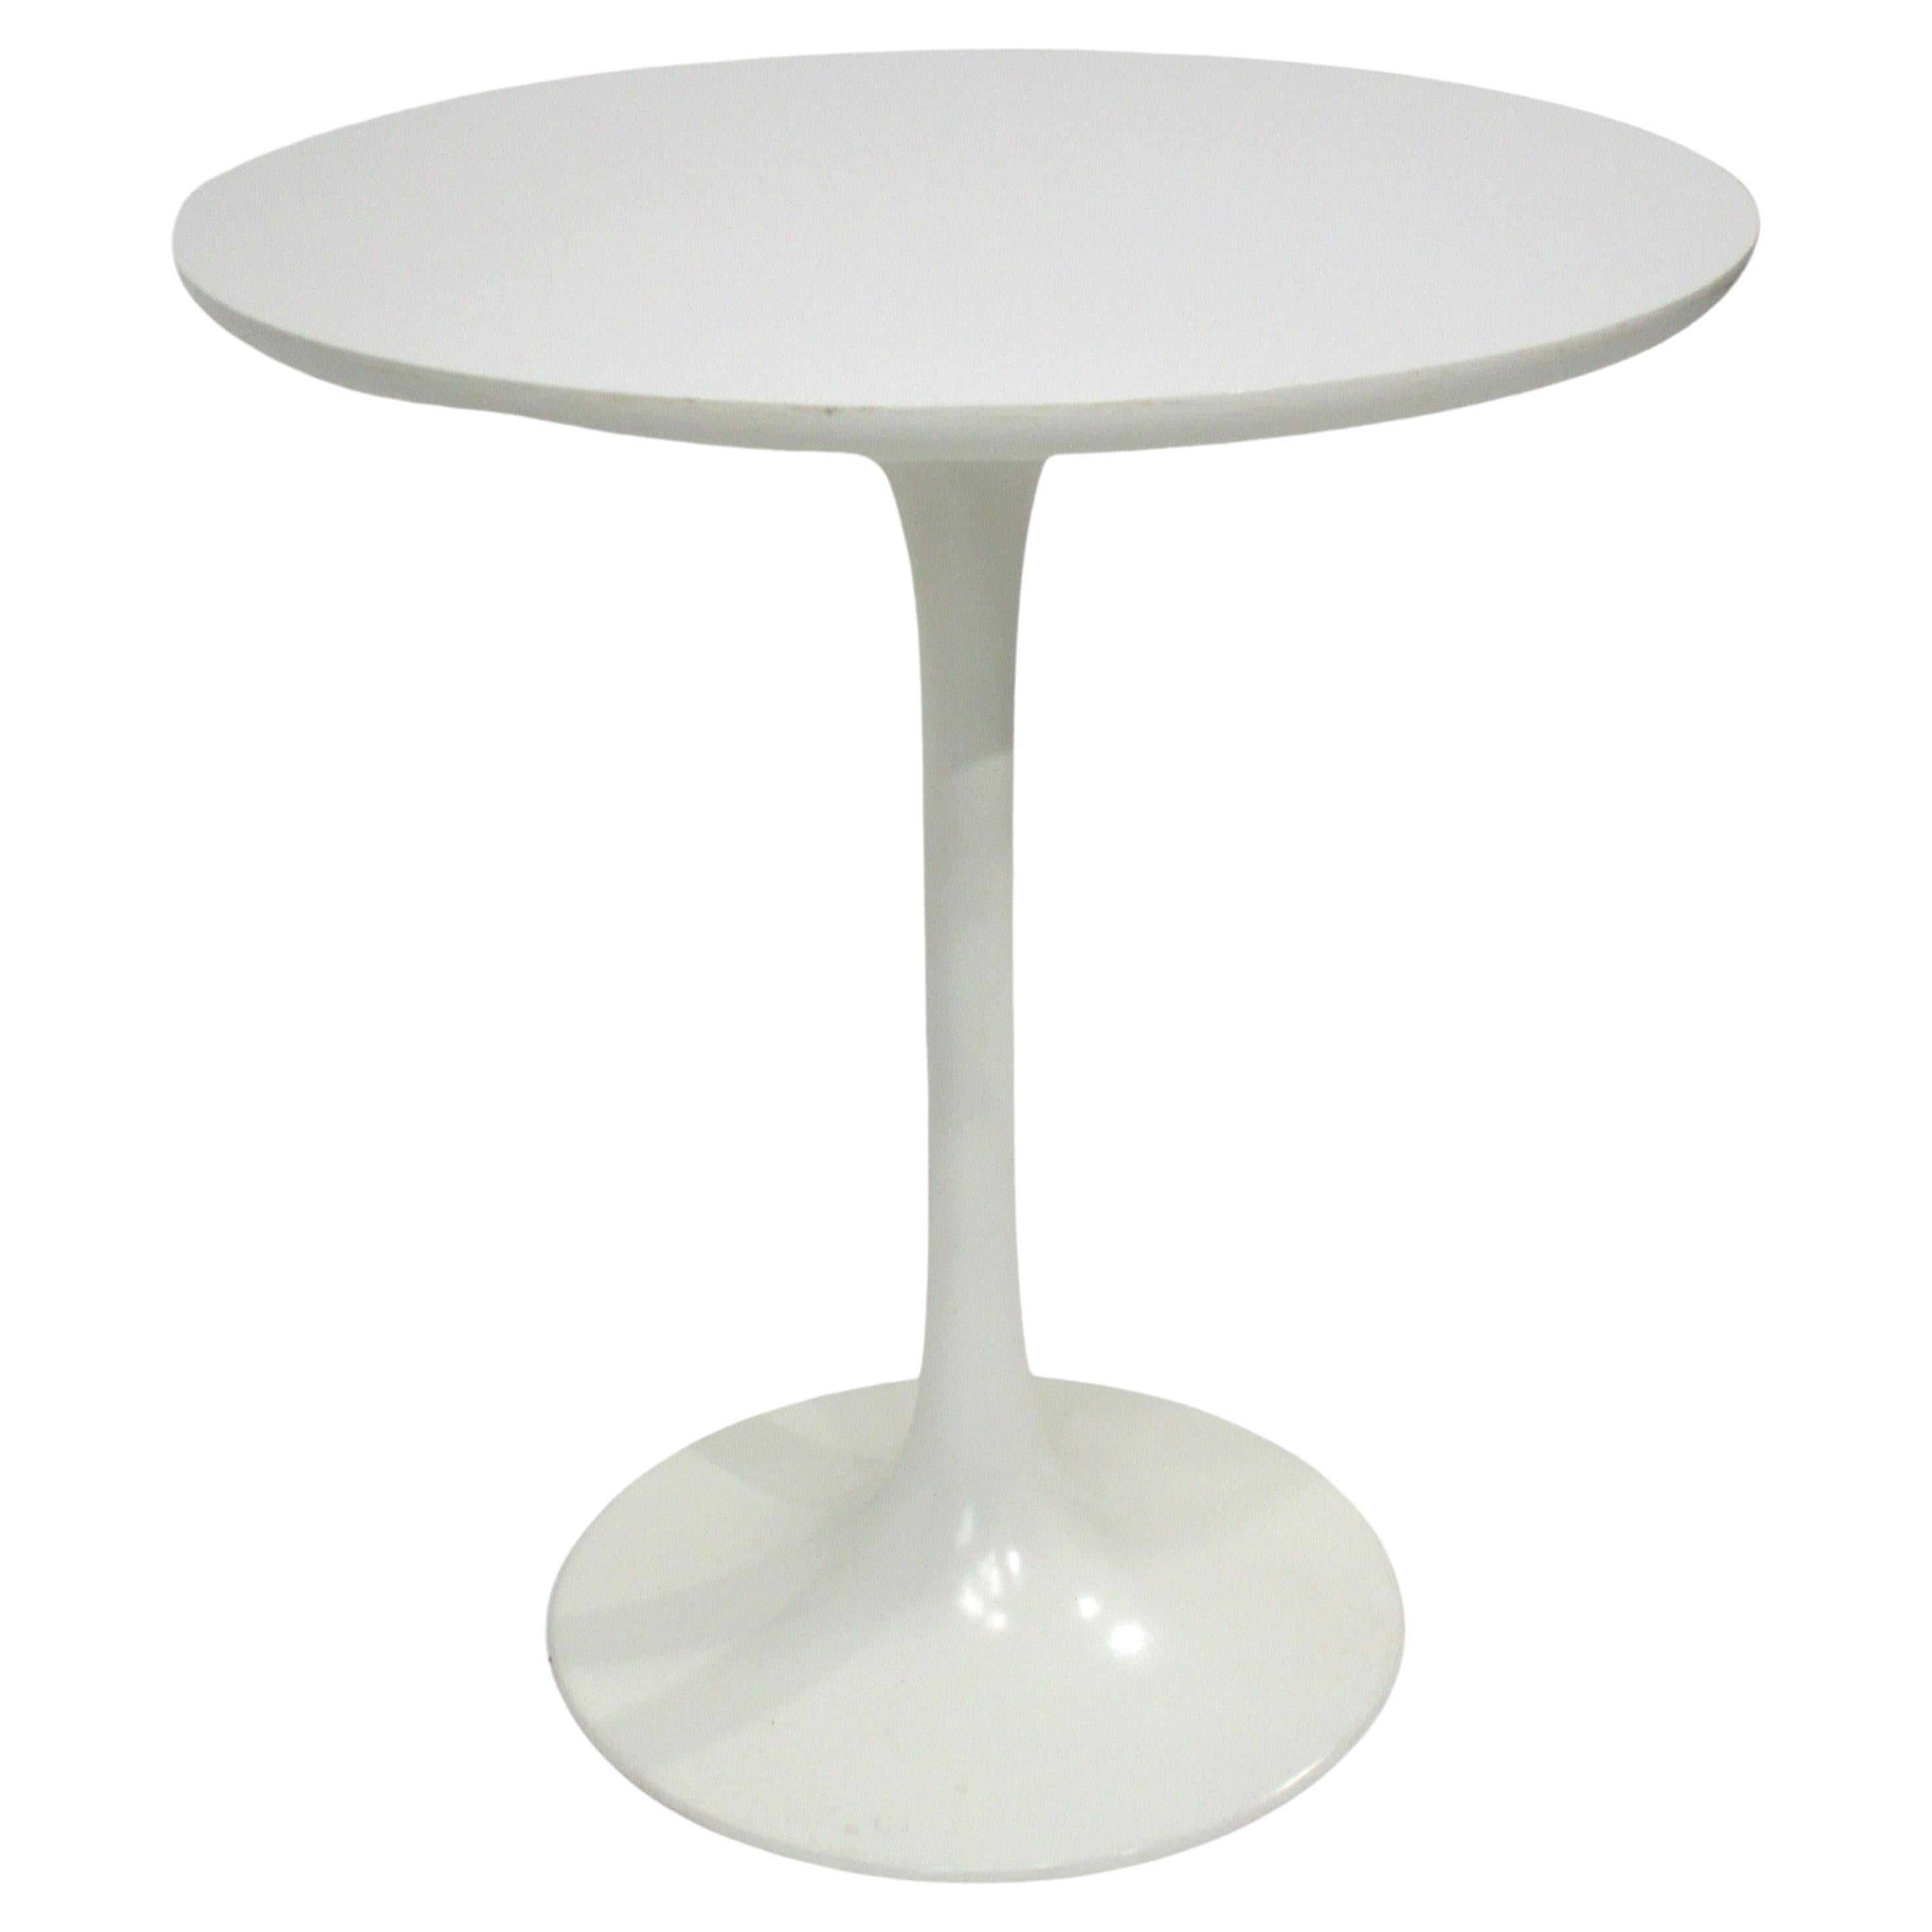 Taller Tulip Side / Lamp Table by Maurice Burke in the style of Saarinen  For Sale